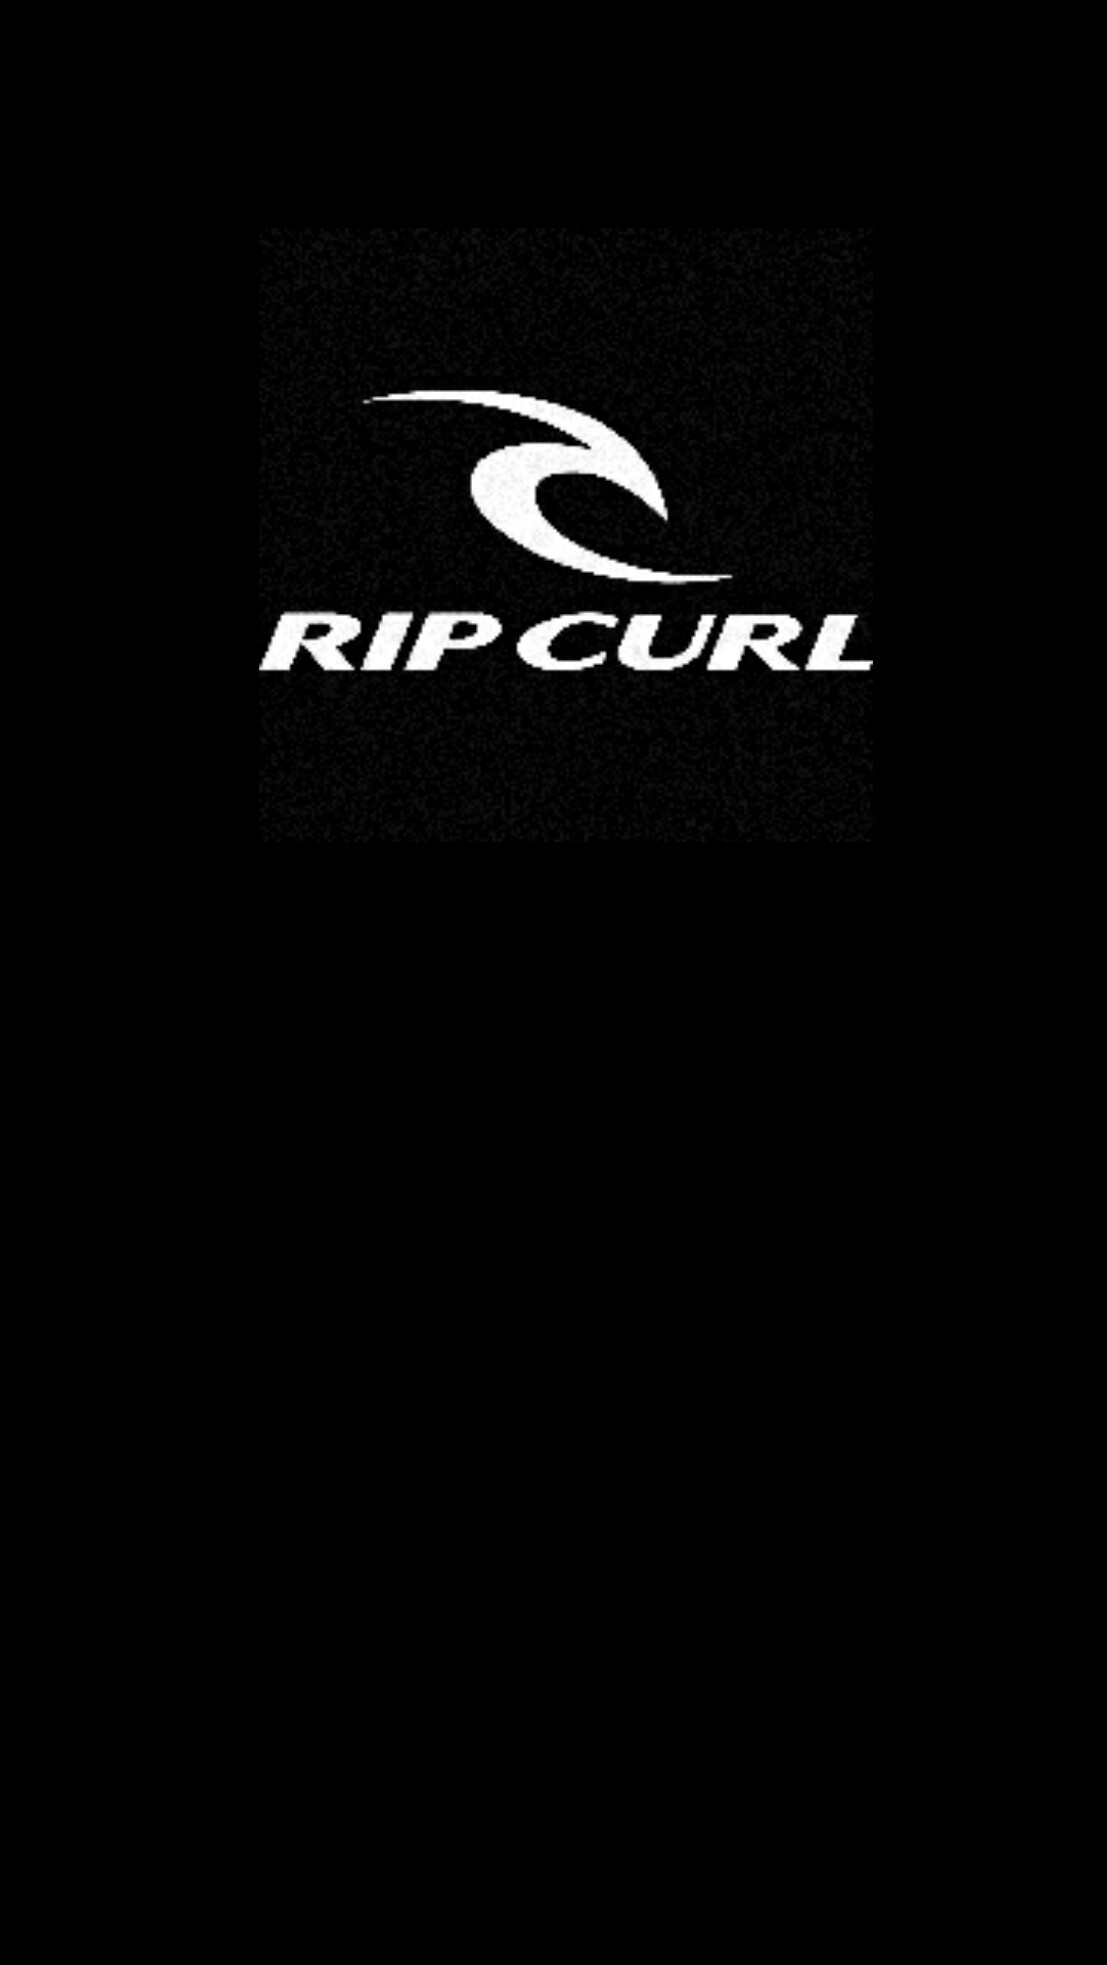 1107x1965 #ripcurl #black #wallpaper #iPhone #android